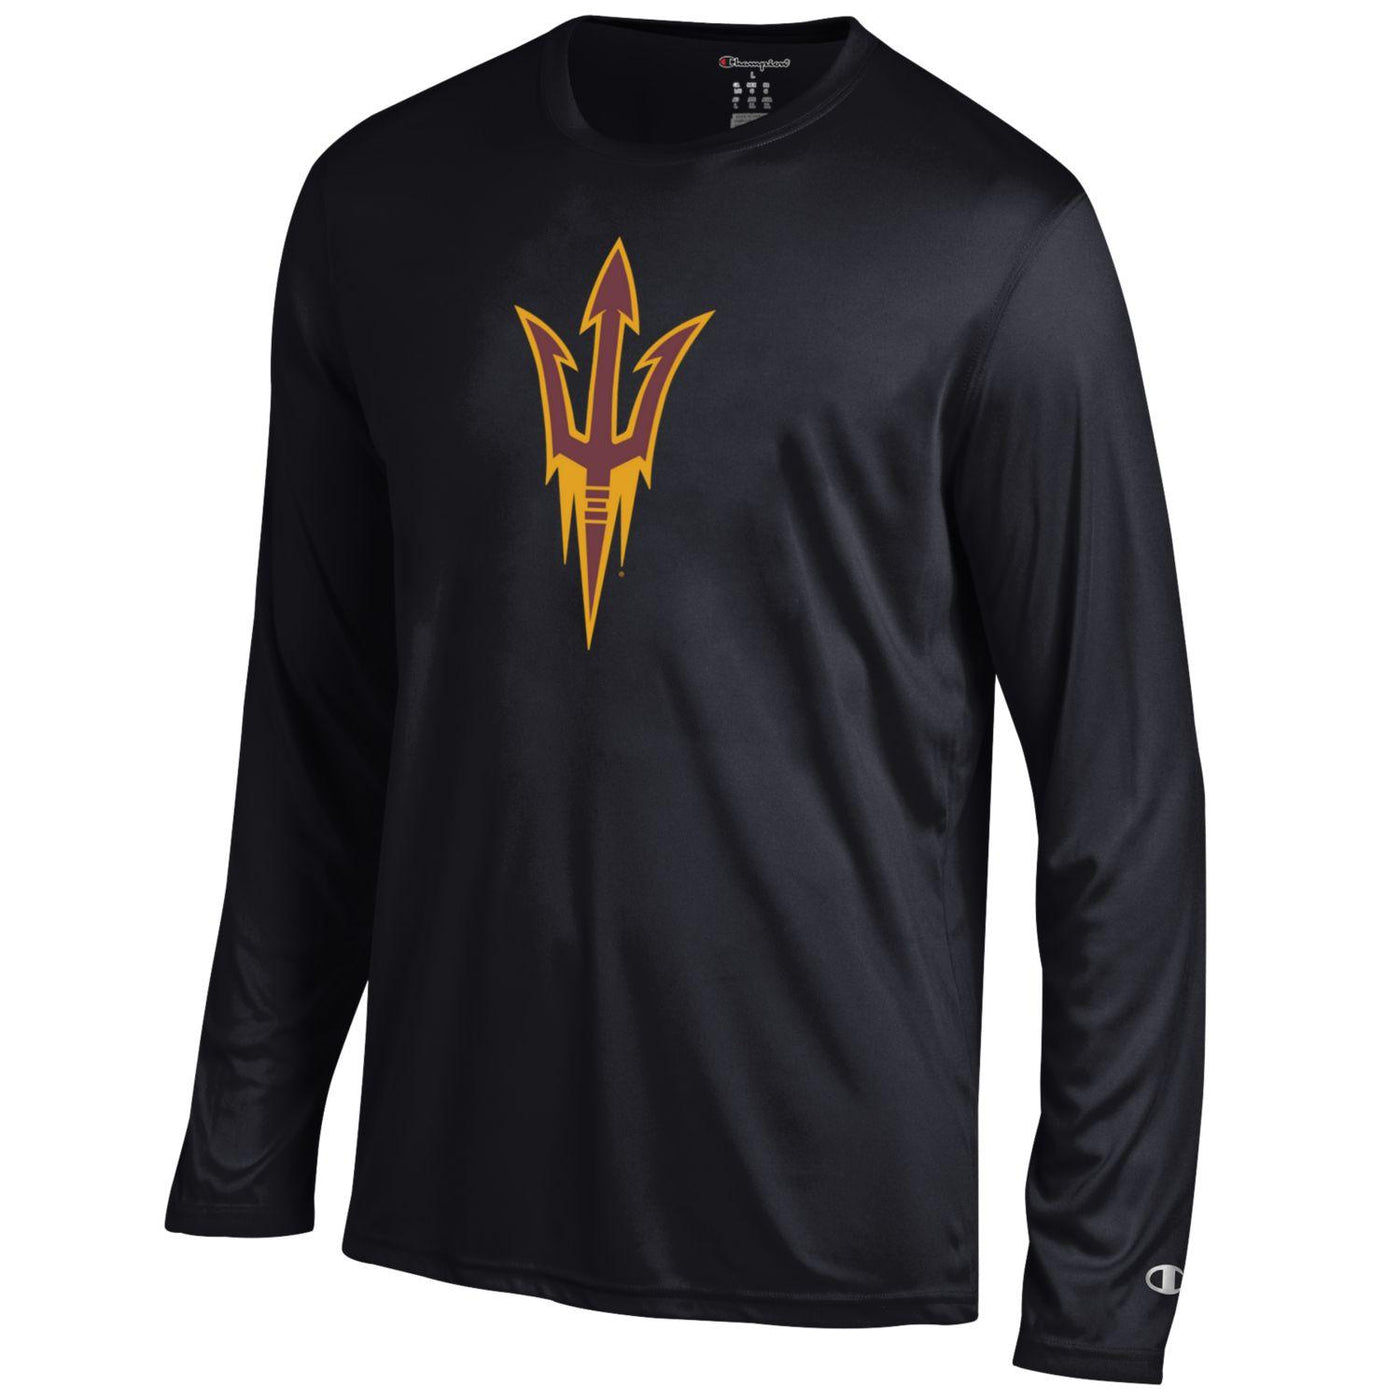 ASU black athletic long sleeve tee with pitchfork in maroon and gold